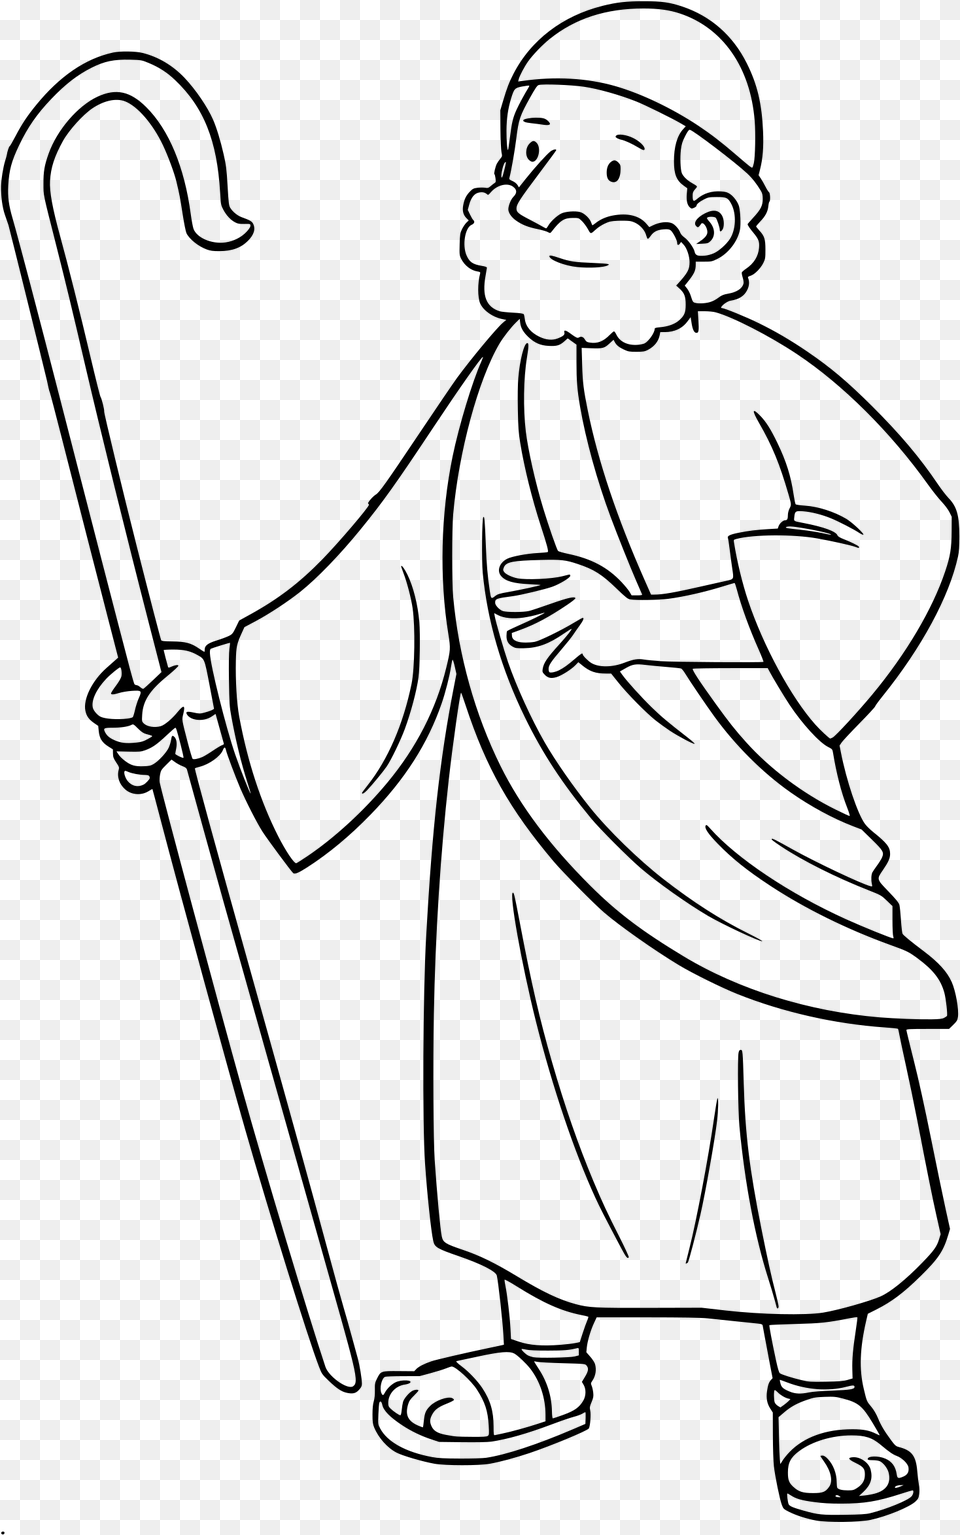 This Icons Design Of Moses The Shepherd, Gray Free Png